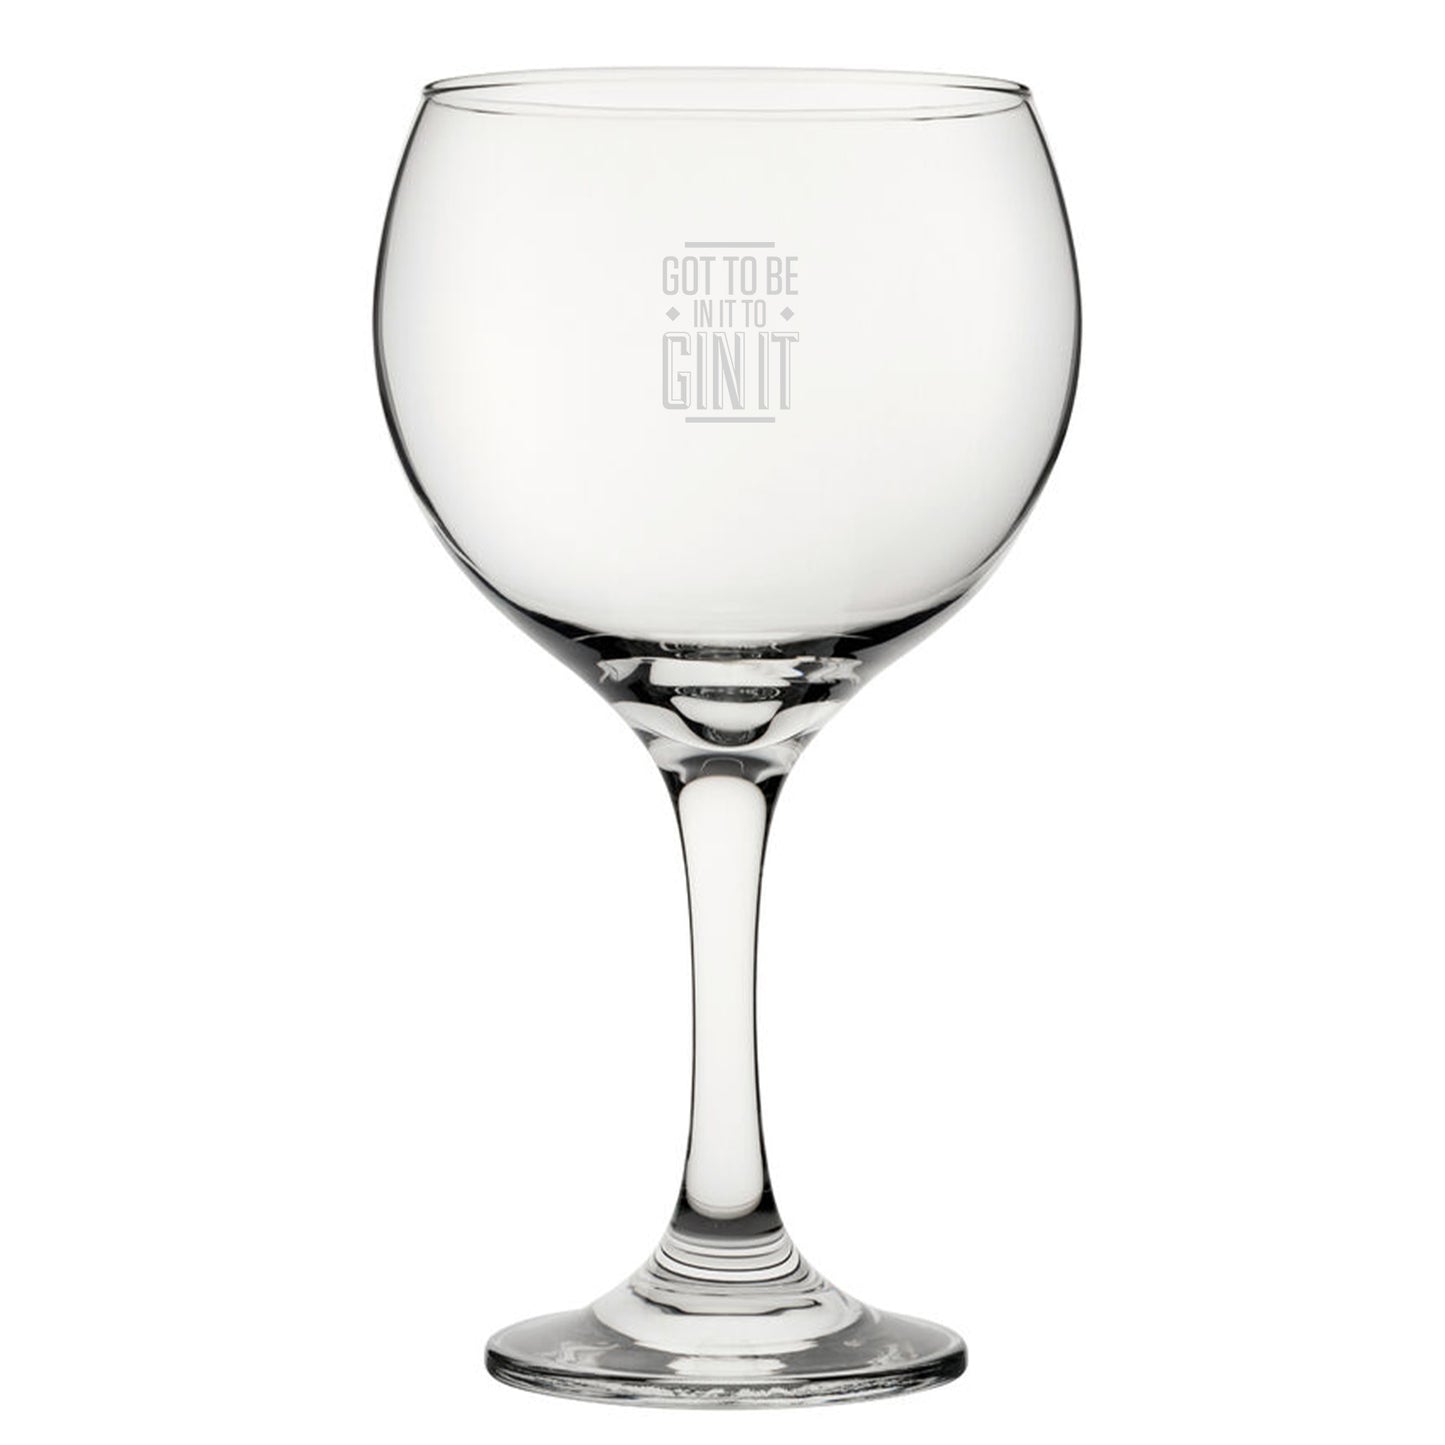 Got To Be In It To Gin It - Engraved Novelty Gin Balloon Cocktail  Glass Image 2